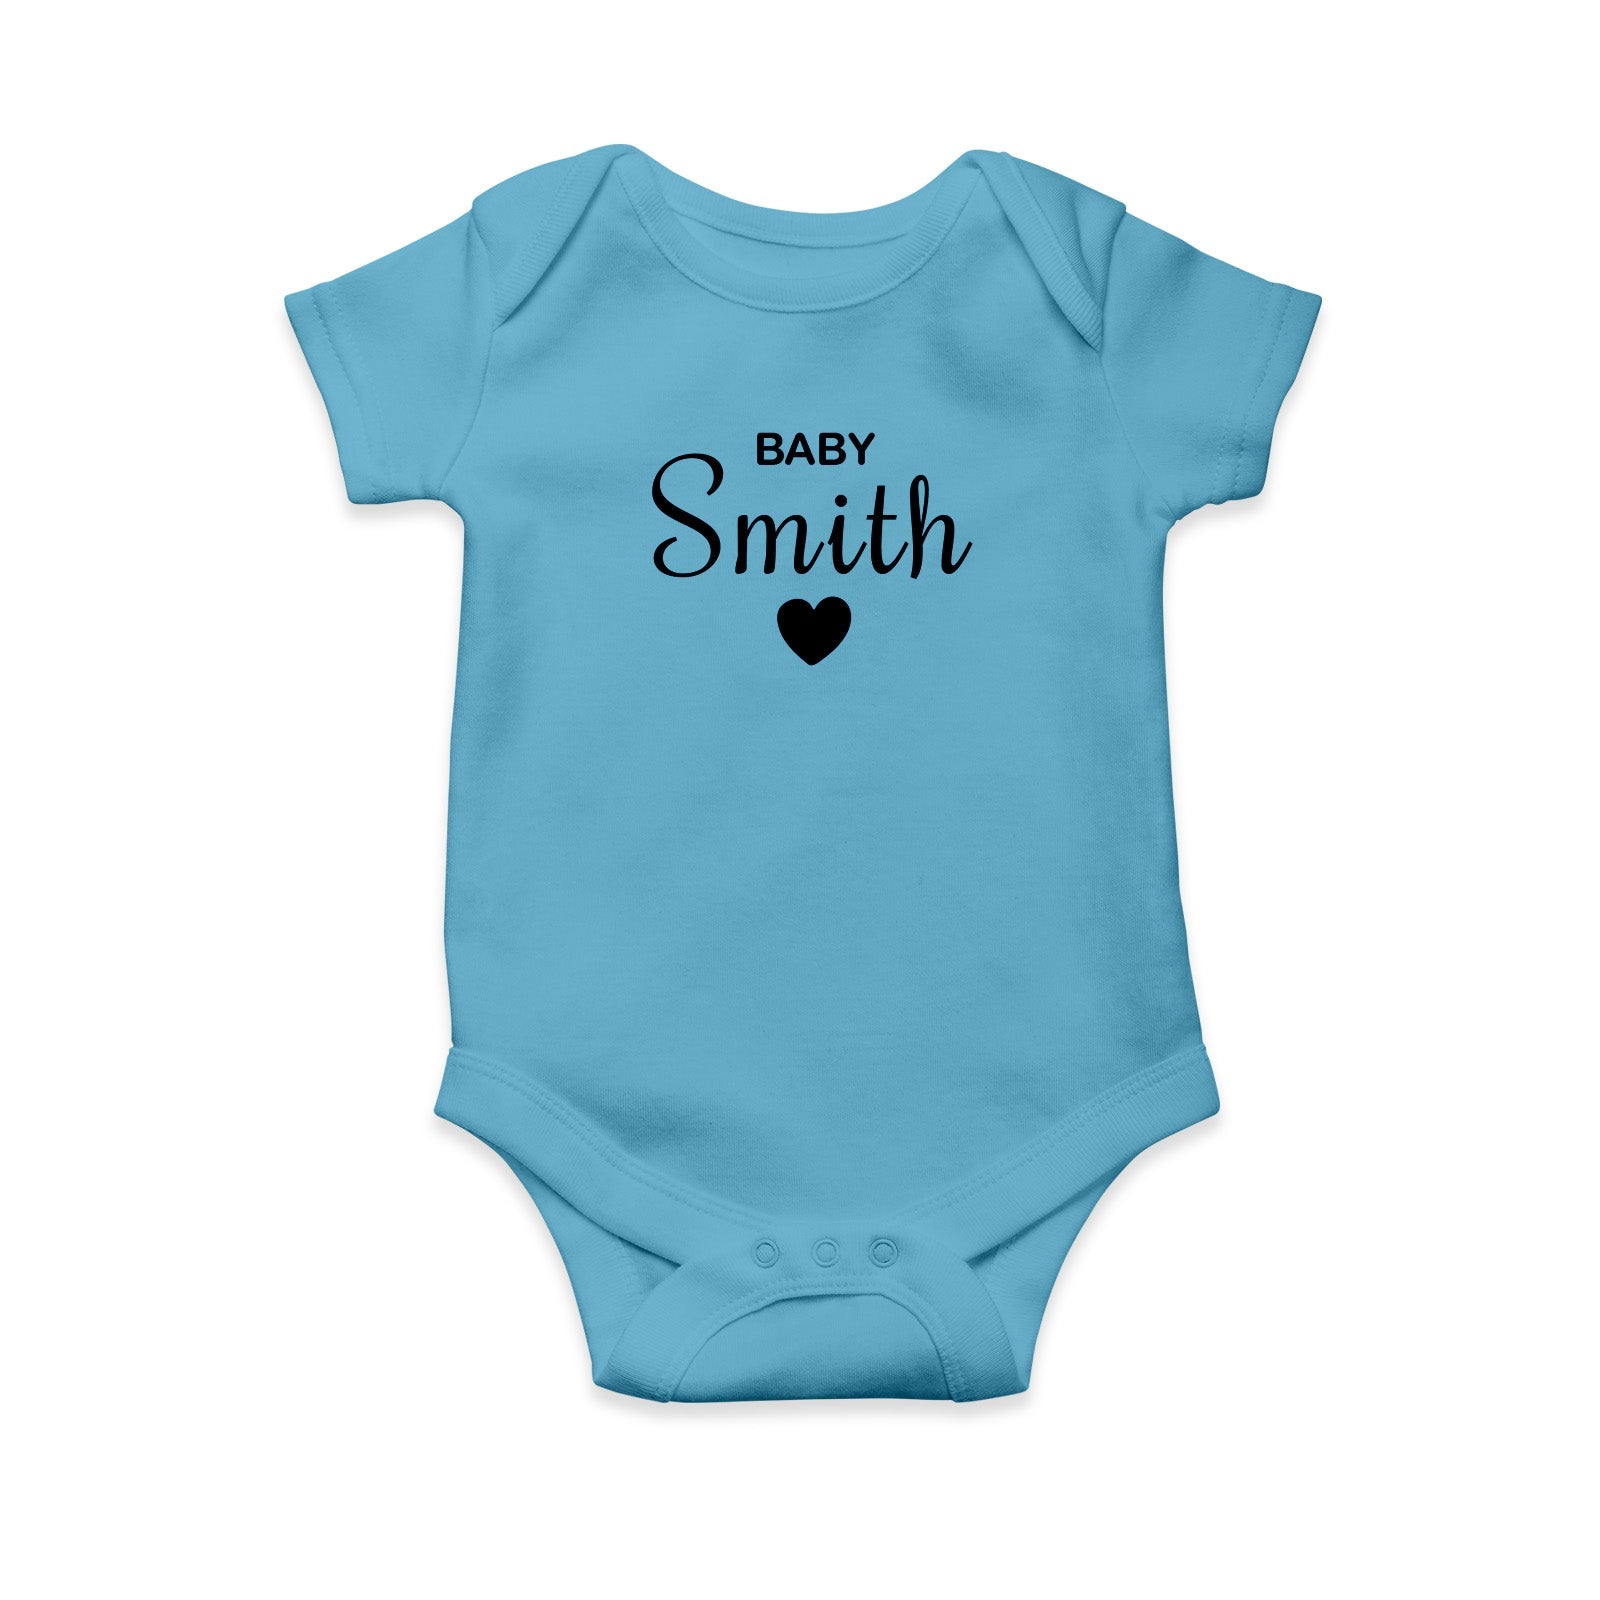 Personalised White Baby Body Suit Grow Vest  - Middle Heart